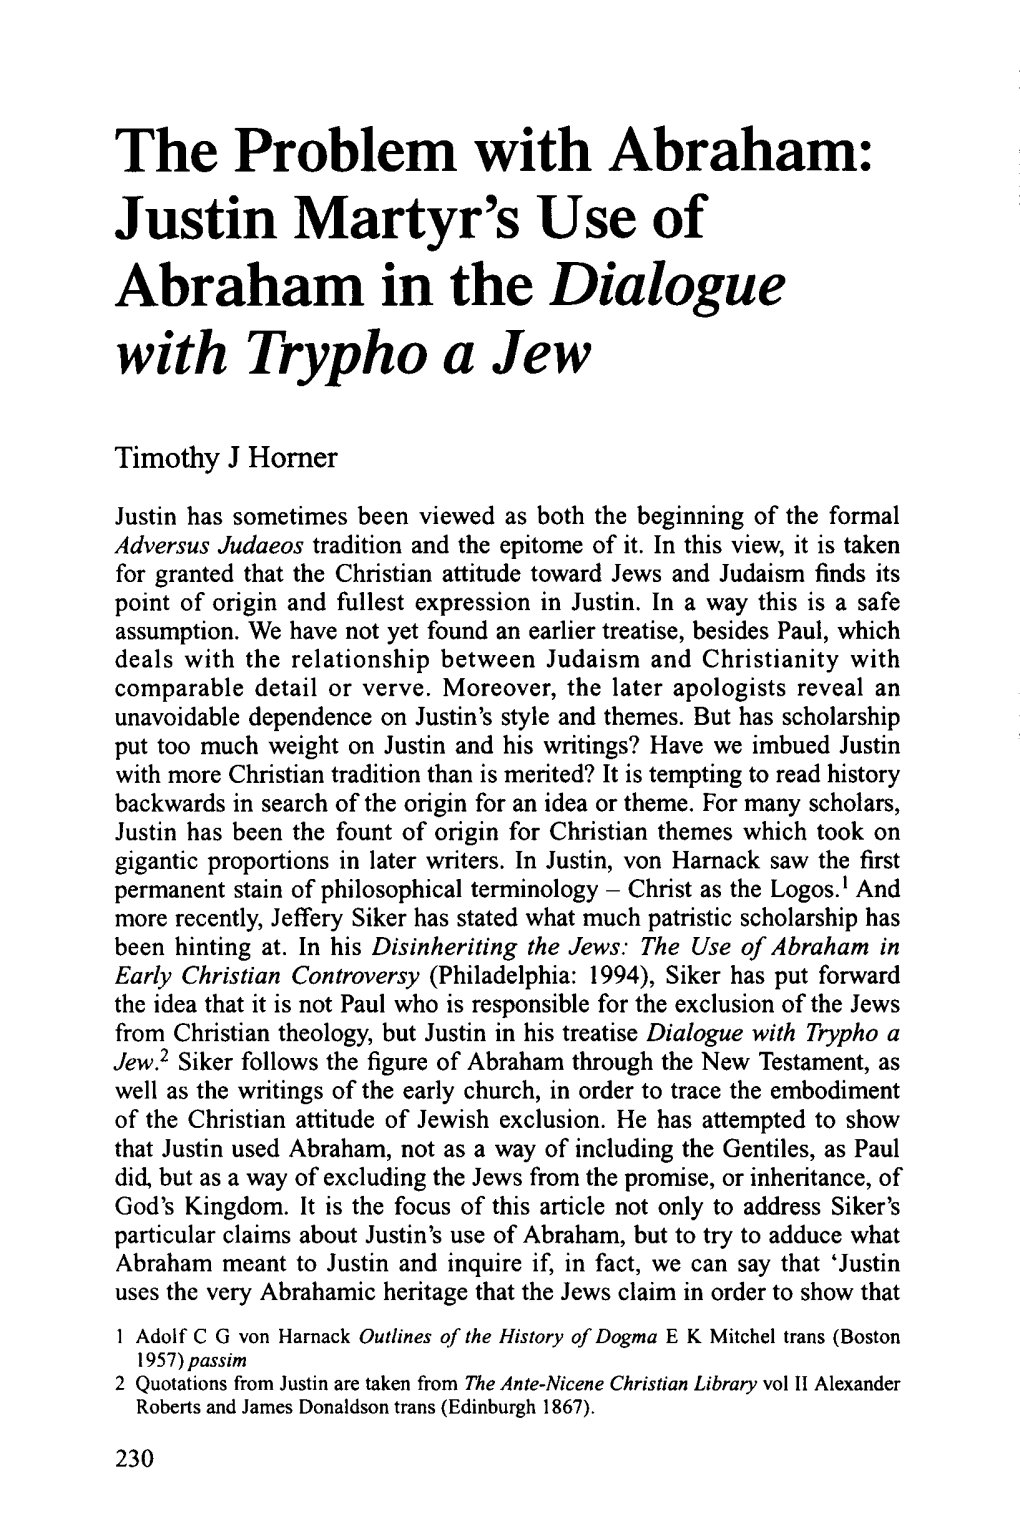 J Ustin Martyr's Use of Abraham in the Dialogue with Trypho A